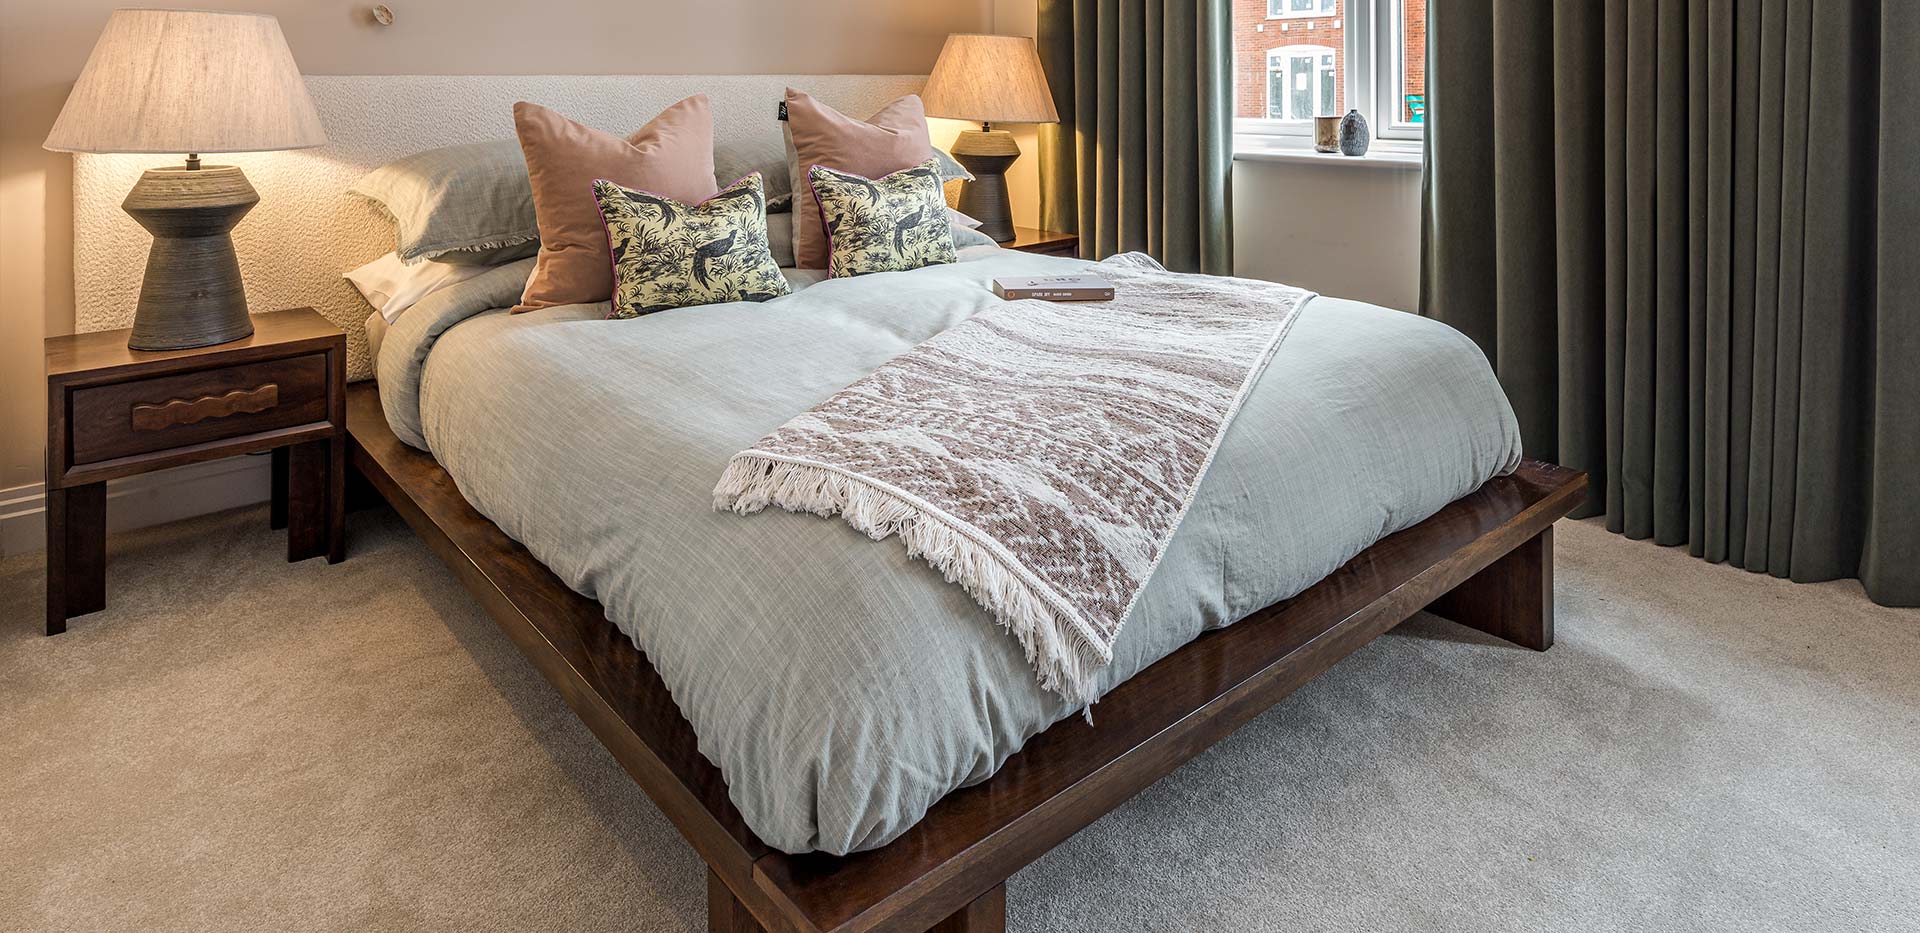 sunninghill-square_3-bed-showhome_interior_bedroom-2